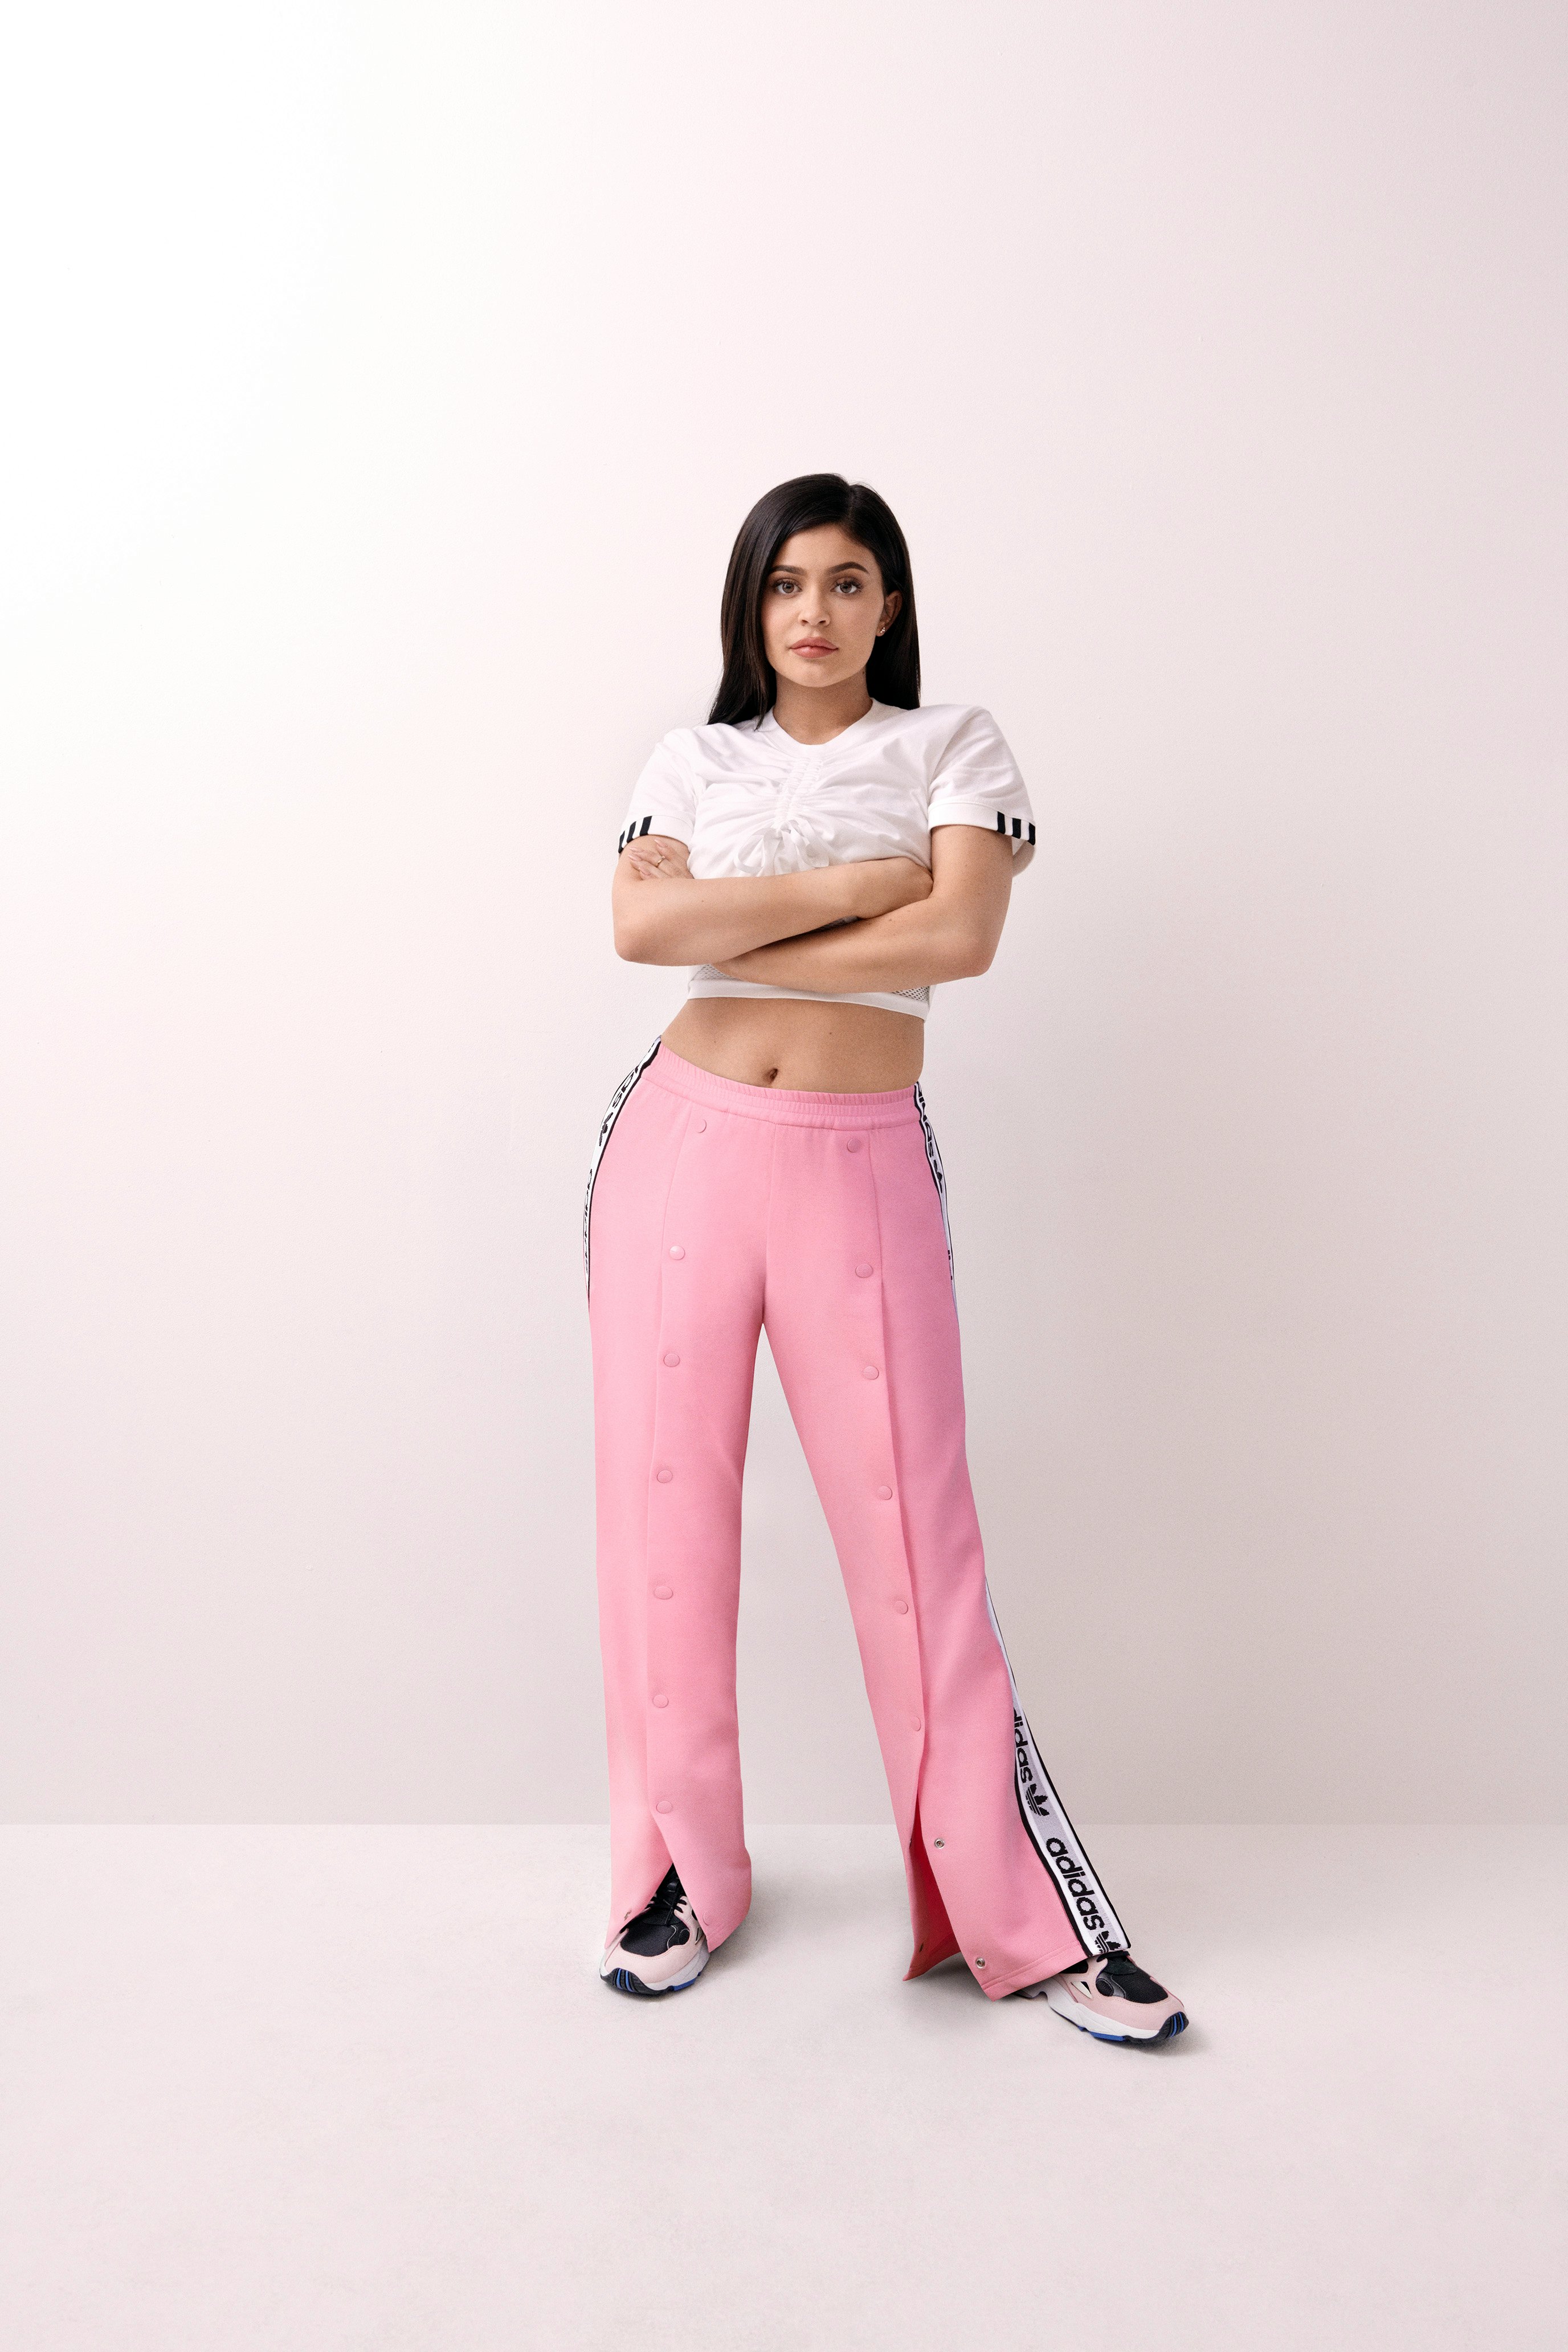 kylie jenner for adidas